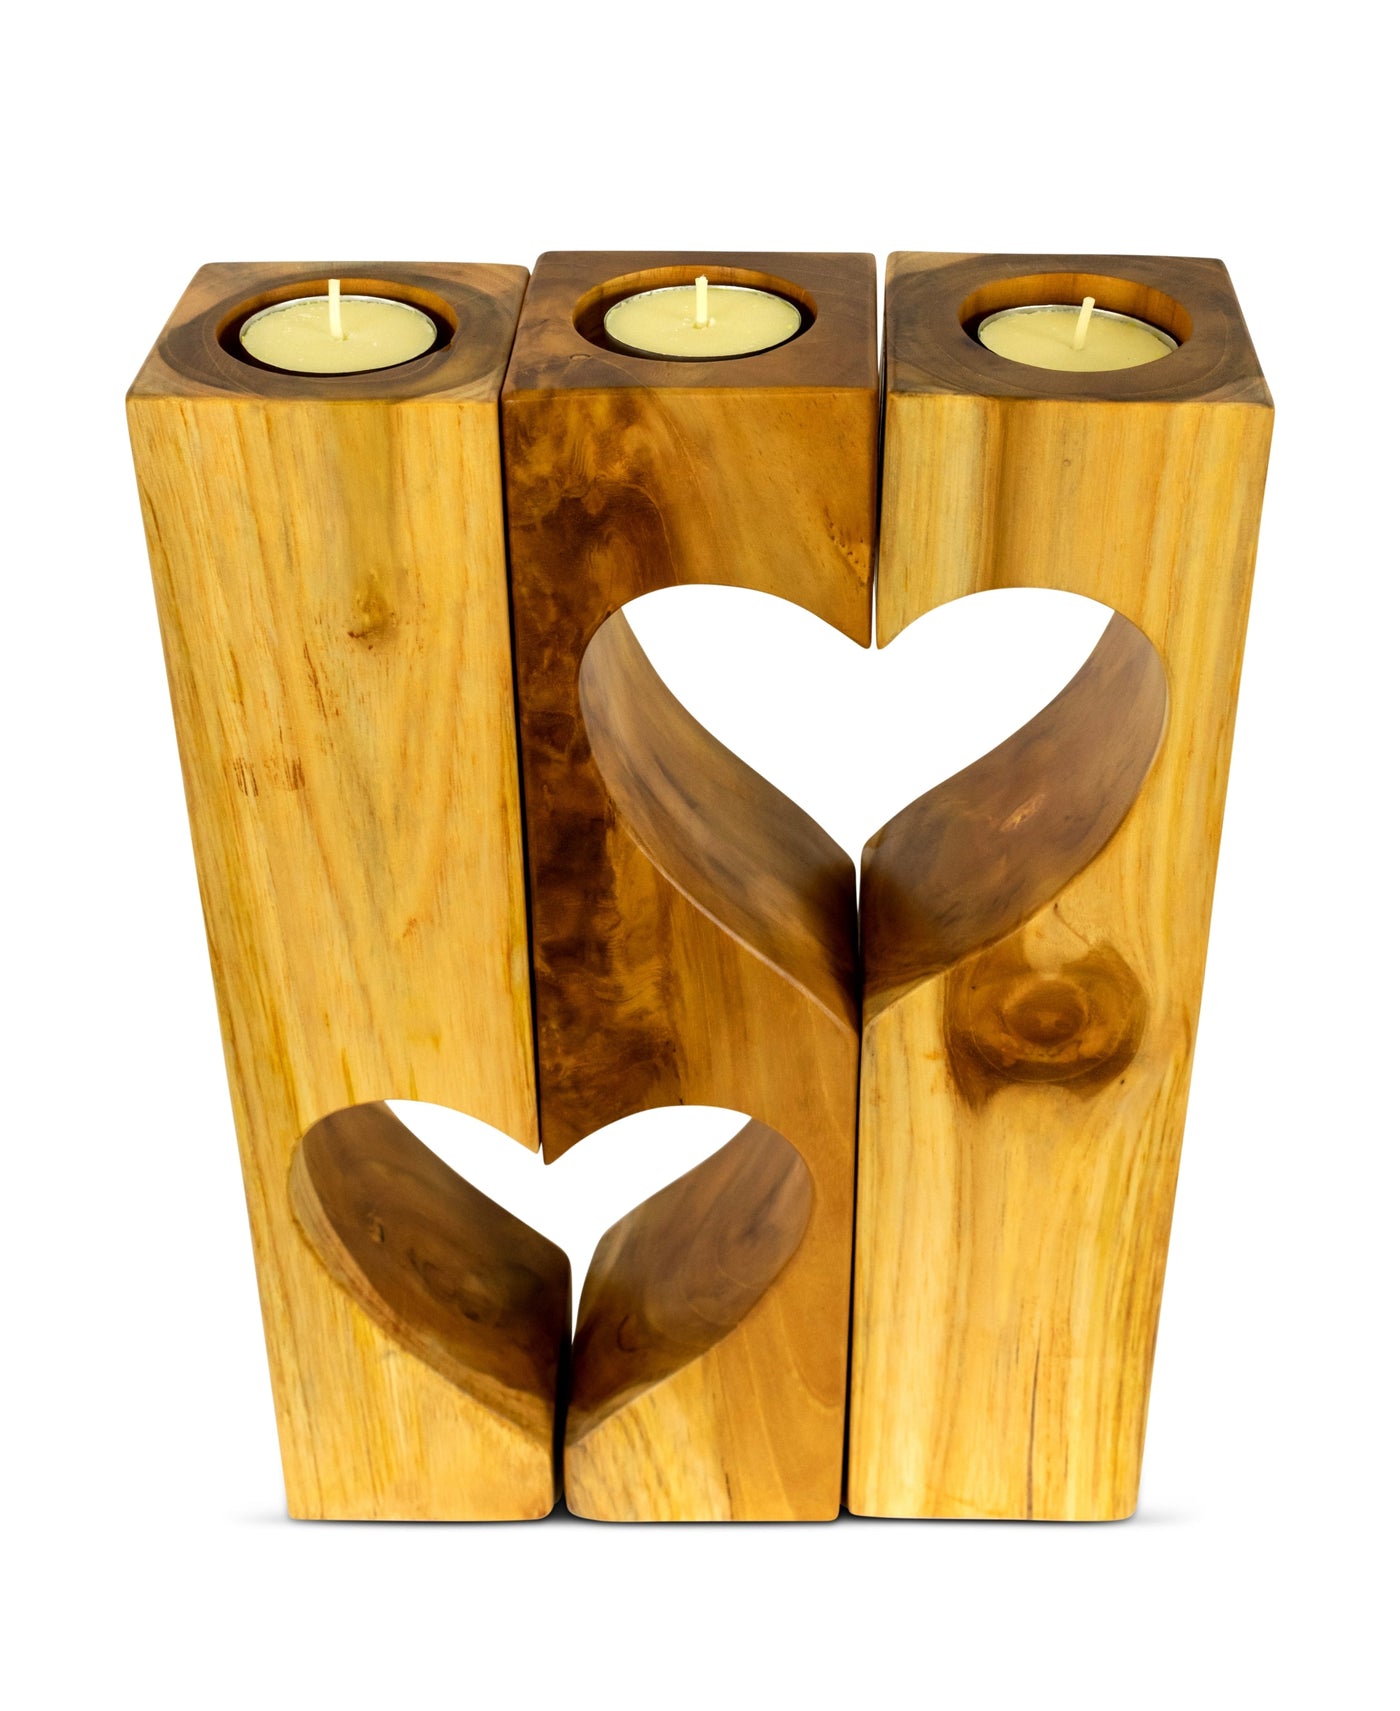 Set of 3 Wooden Hand Carved Candle Holder Heart Shaped Decorative Home Decor Accent Gift Handcrafted Decoration Candlestick Handmade Tea Light